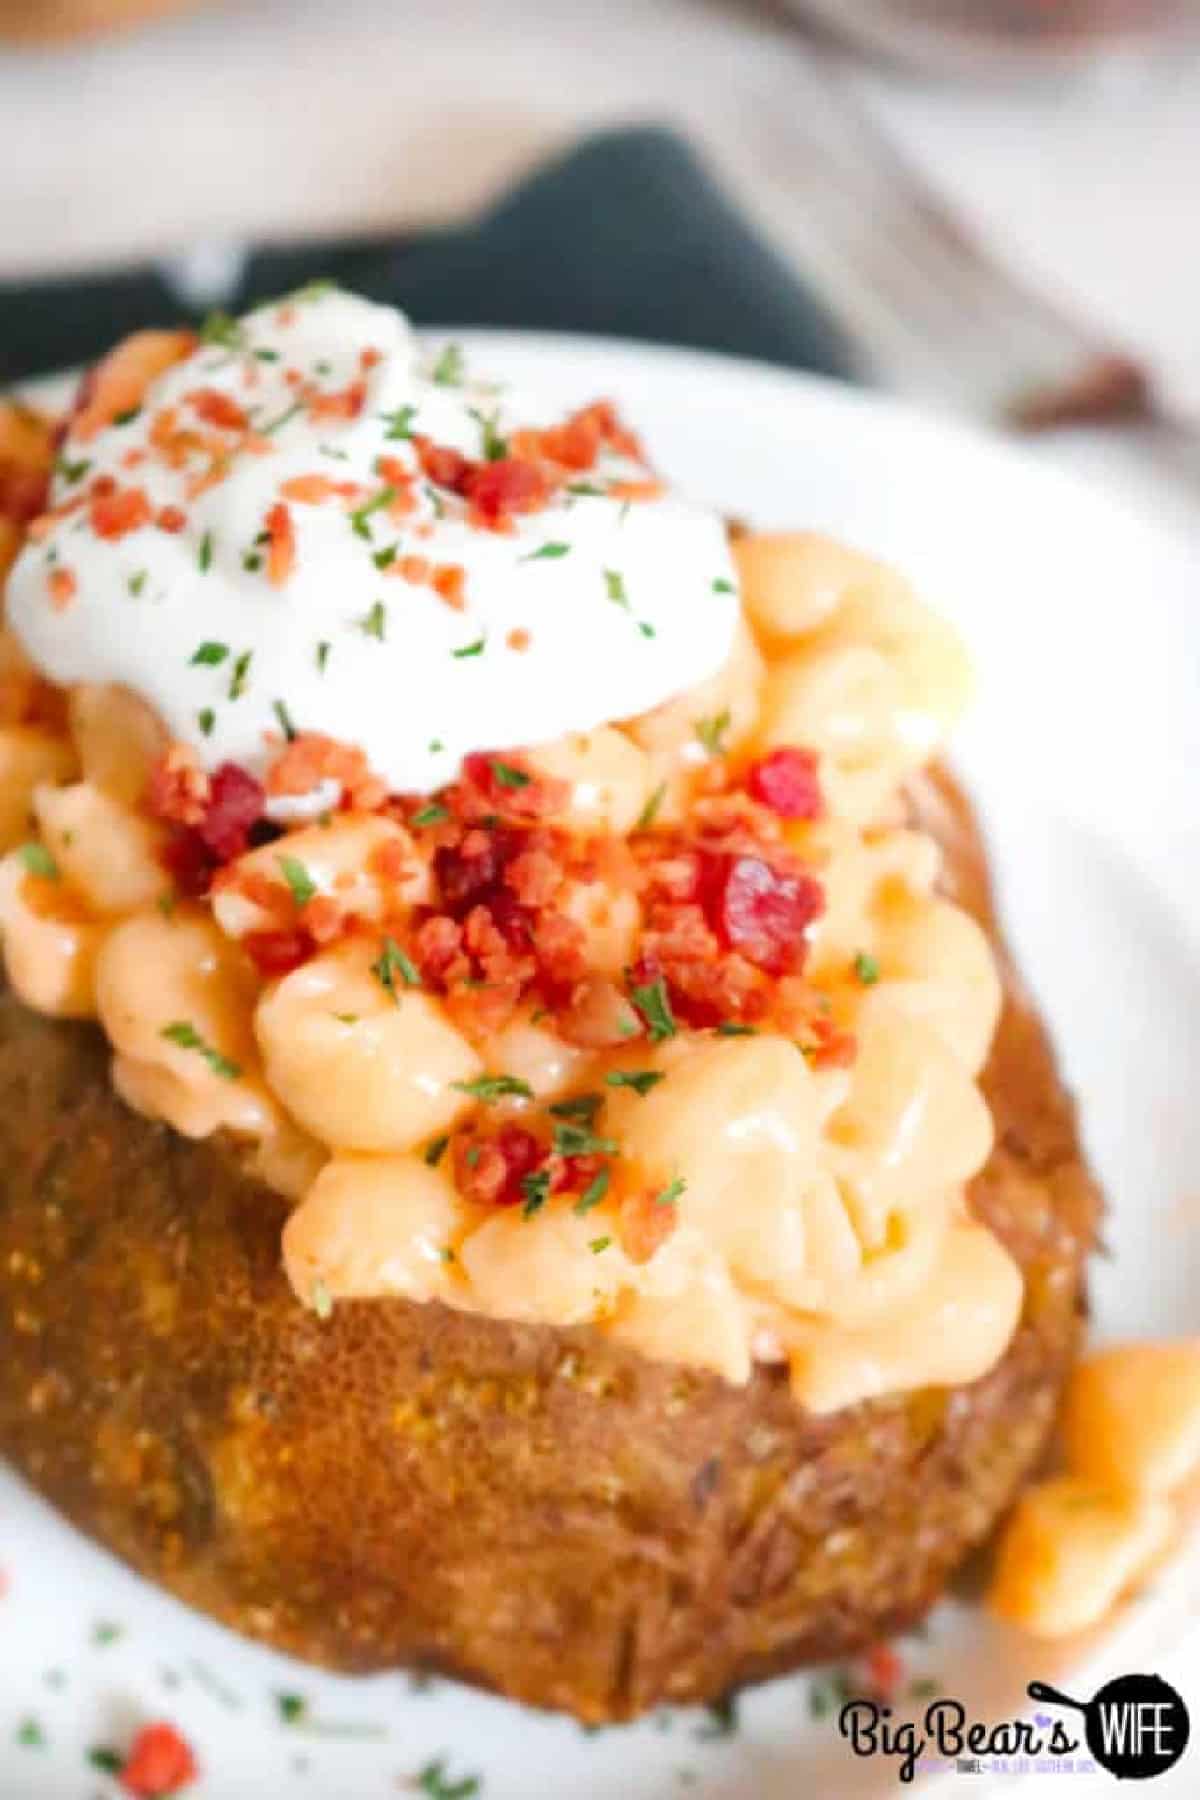 Loaded Mac and Cheese Stuffed Baked Potatoes with bacon bits and sour cream topping on a white plate.